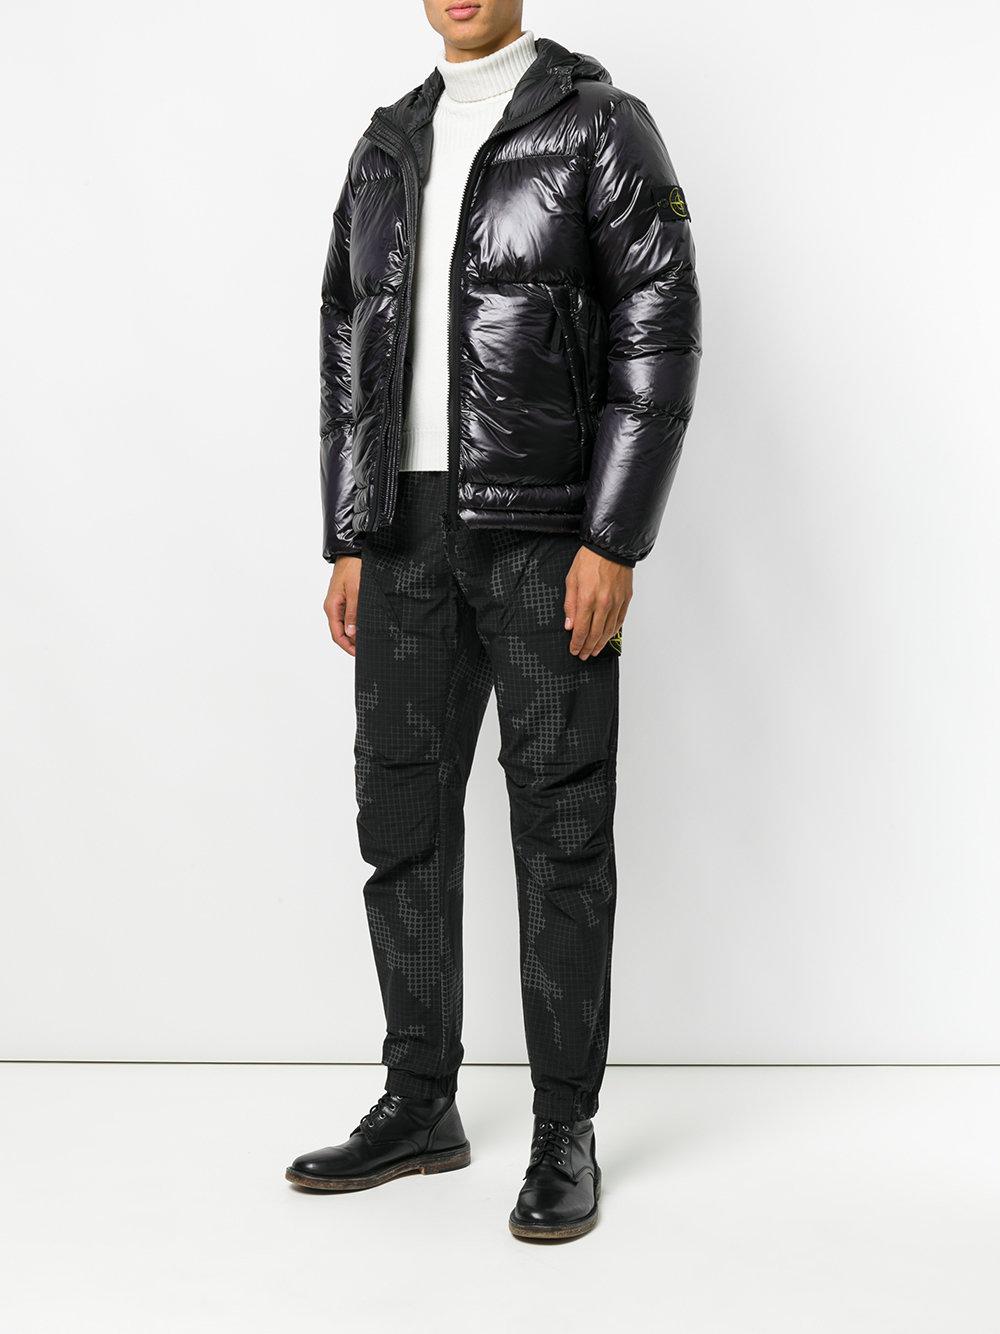 Stone Island Synthetic Glossy Puffer Jacket in Black for Men | Lyst